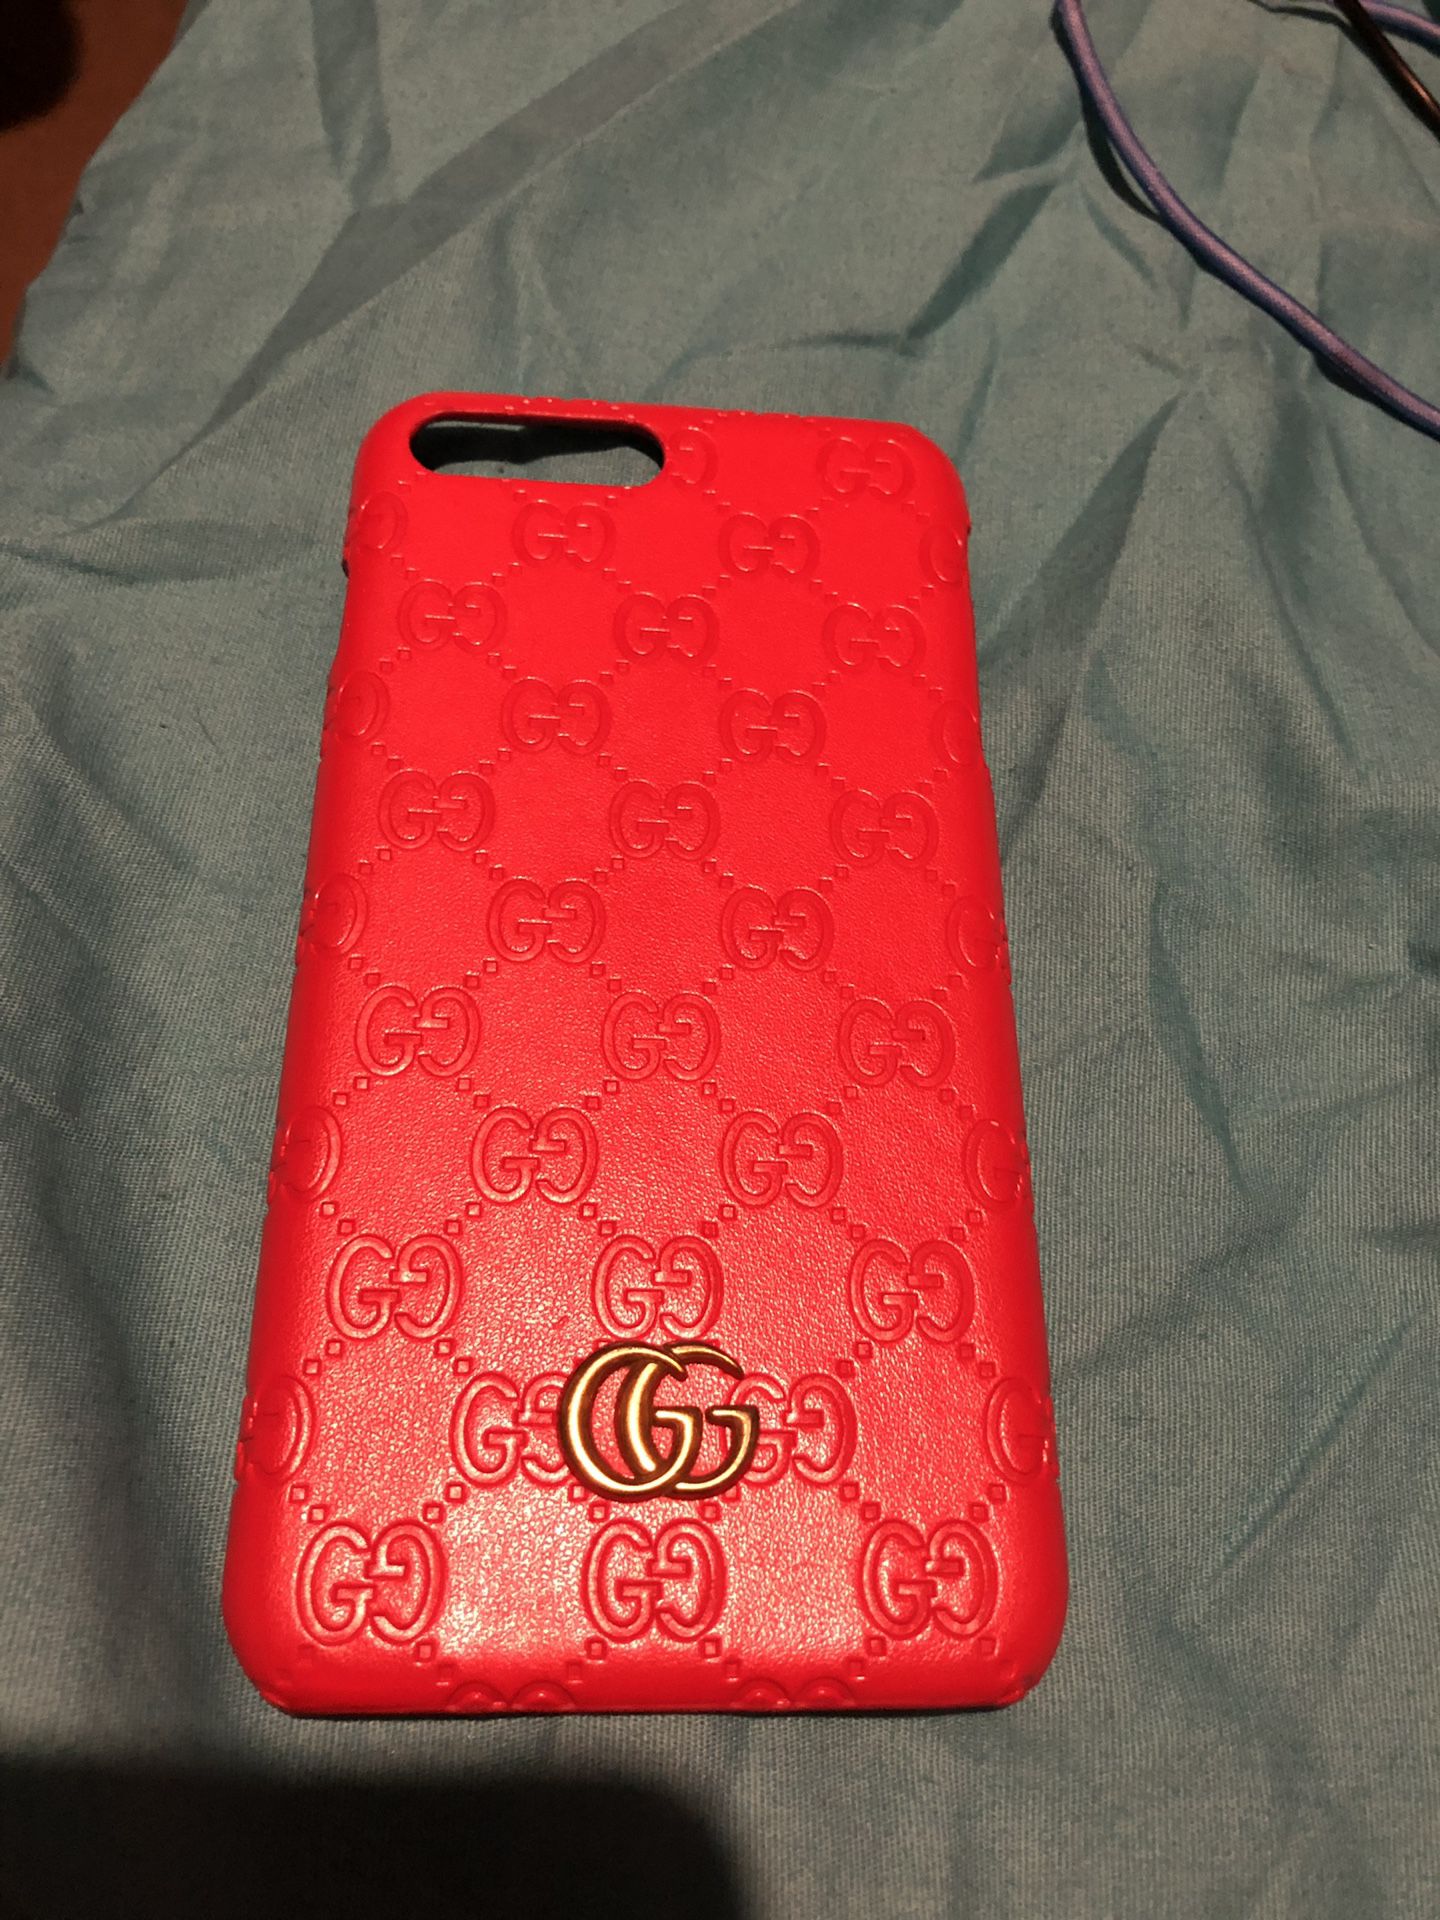 Gucci iPhone plus case for Sale in New Port Richey, FL - OfferUp